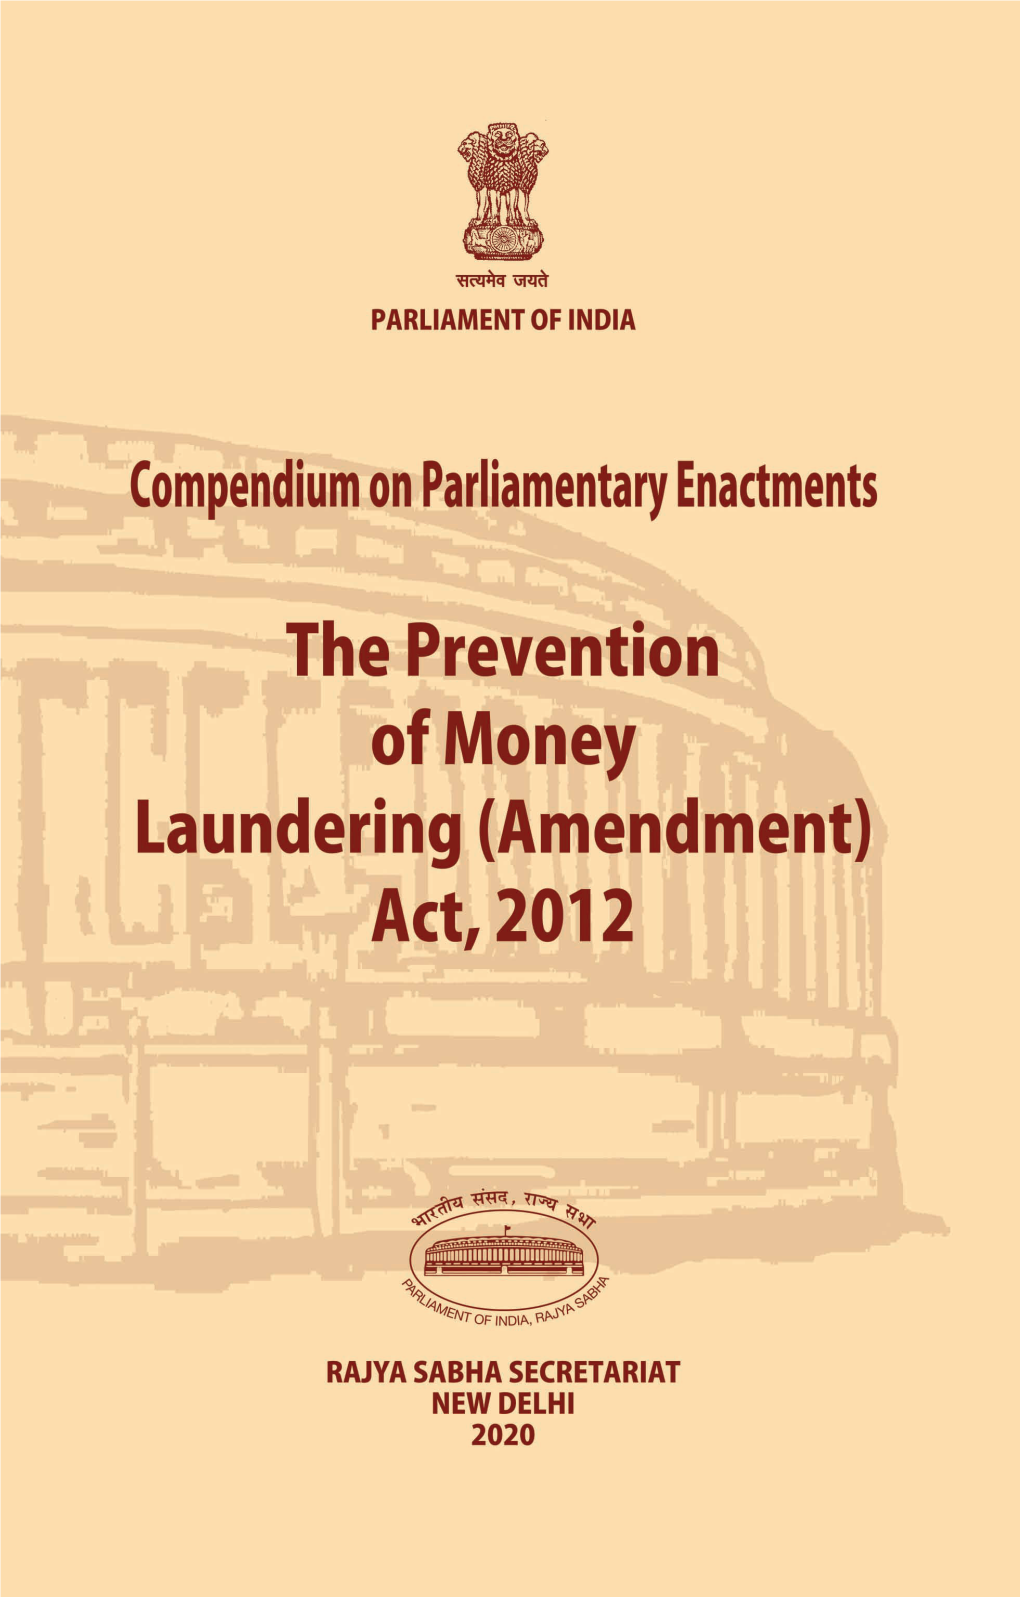 The Prevention of Money Laundering (Amendment) Act, 2012